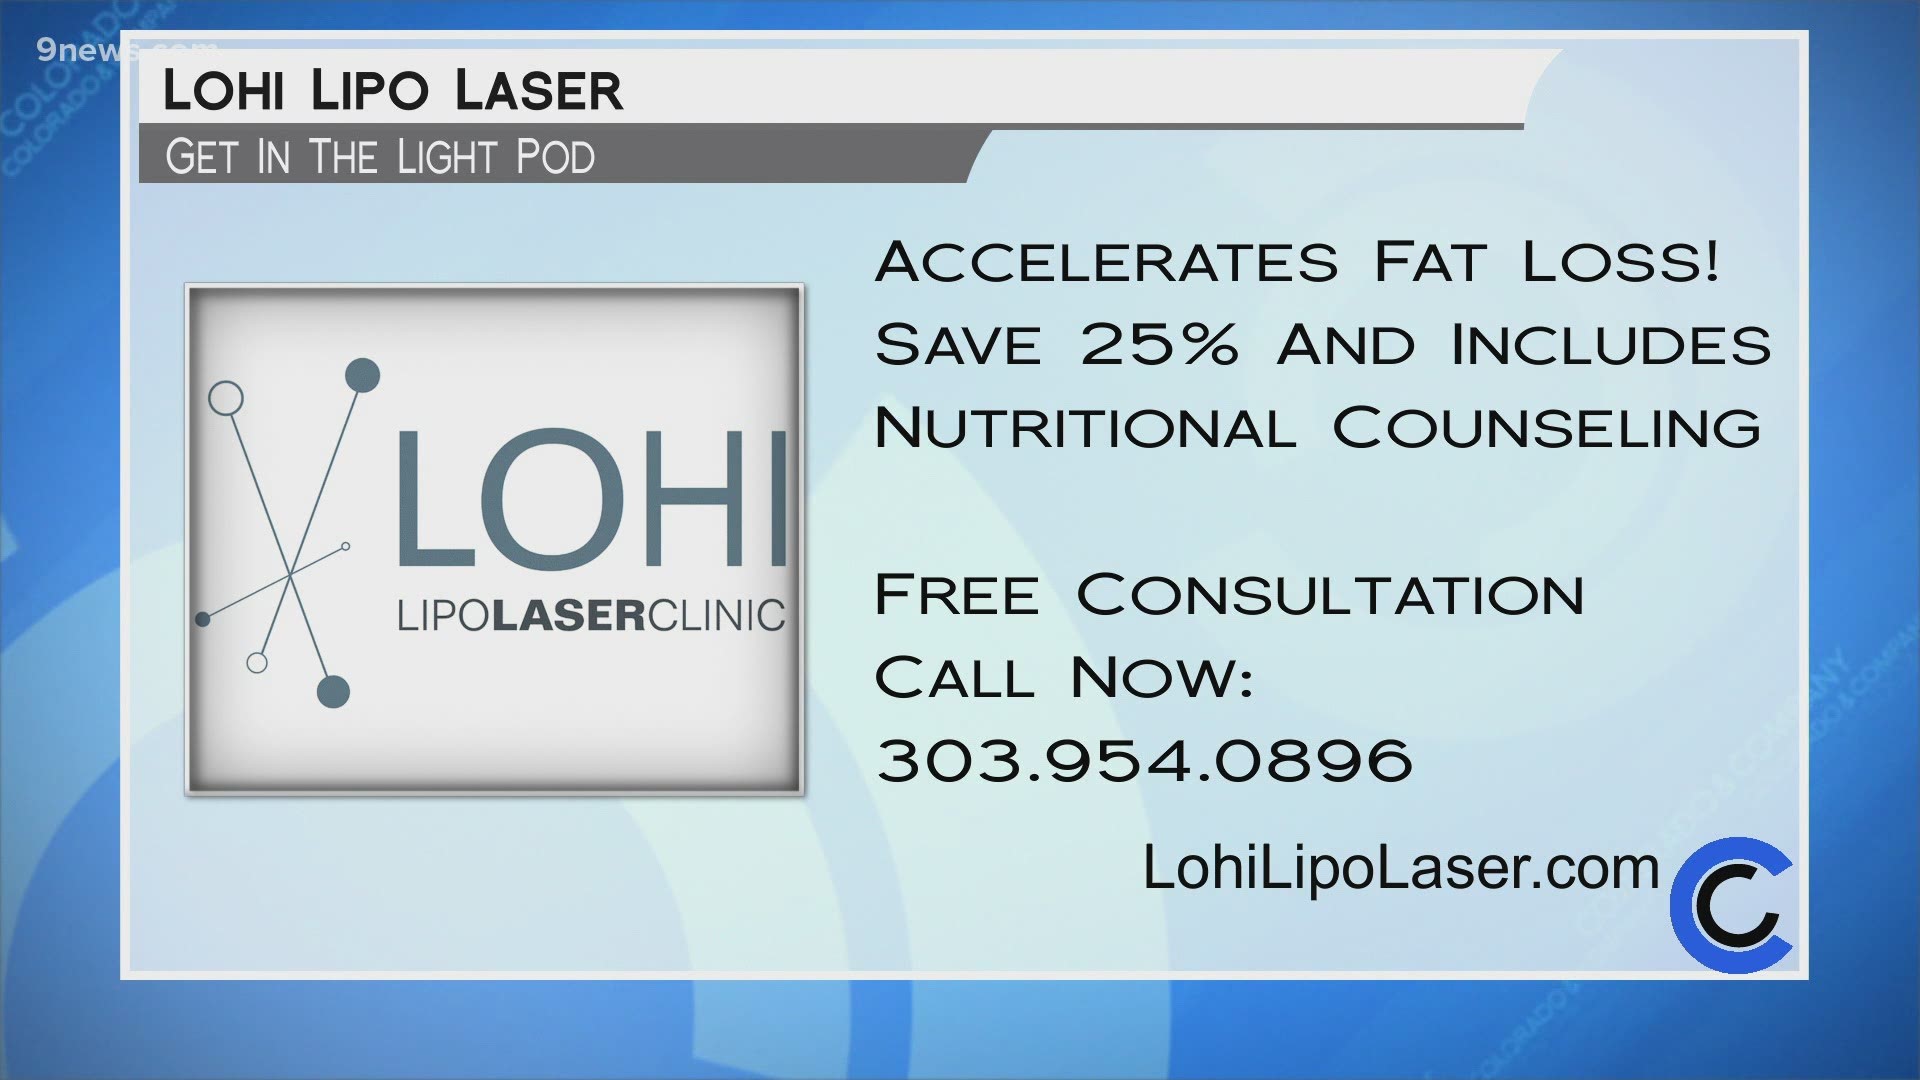 Book your appointment by calling 303.954.0896 or visit LohiLipoLaser.com. Get started with 25% off  Light Pod protocol treatment.